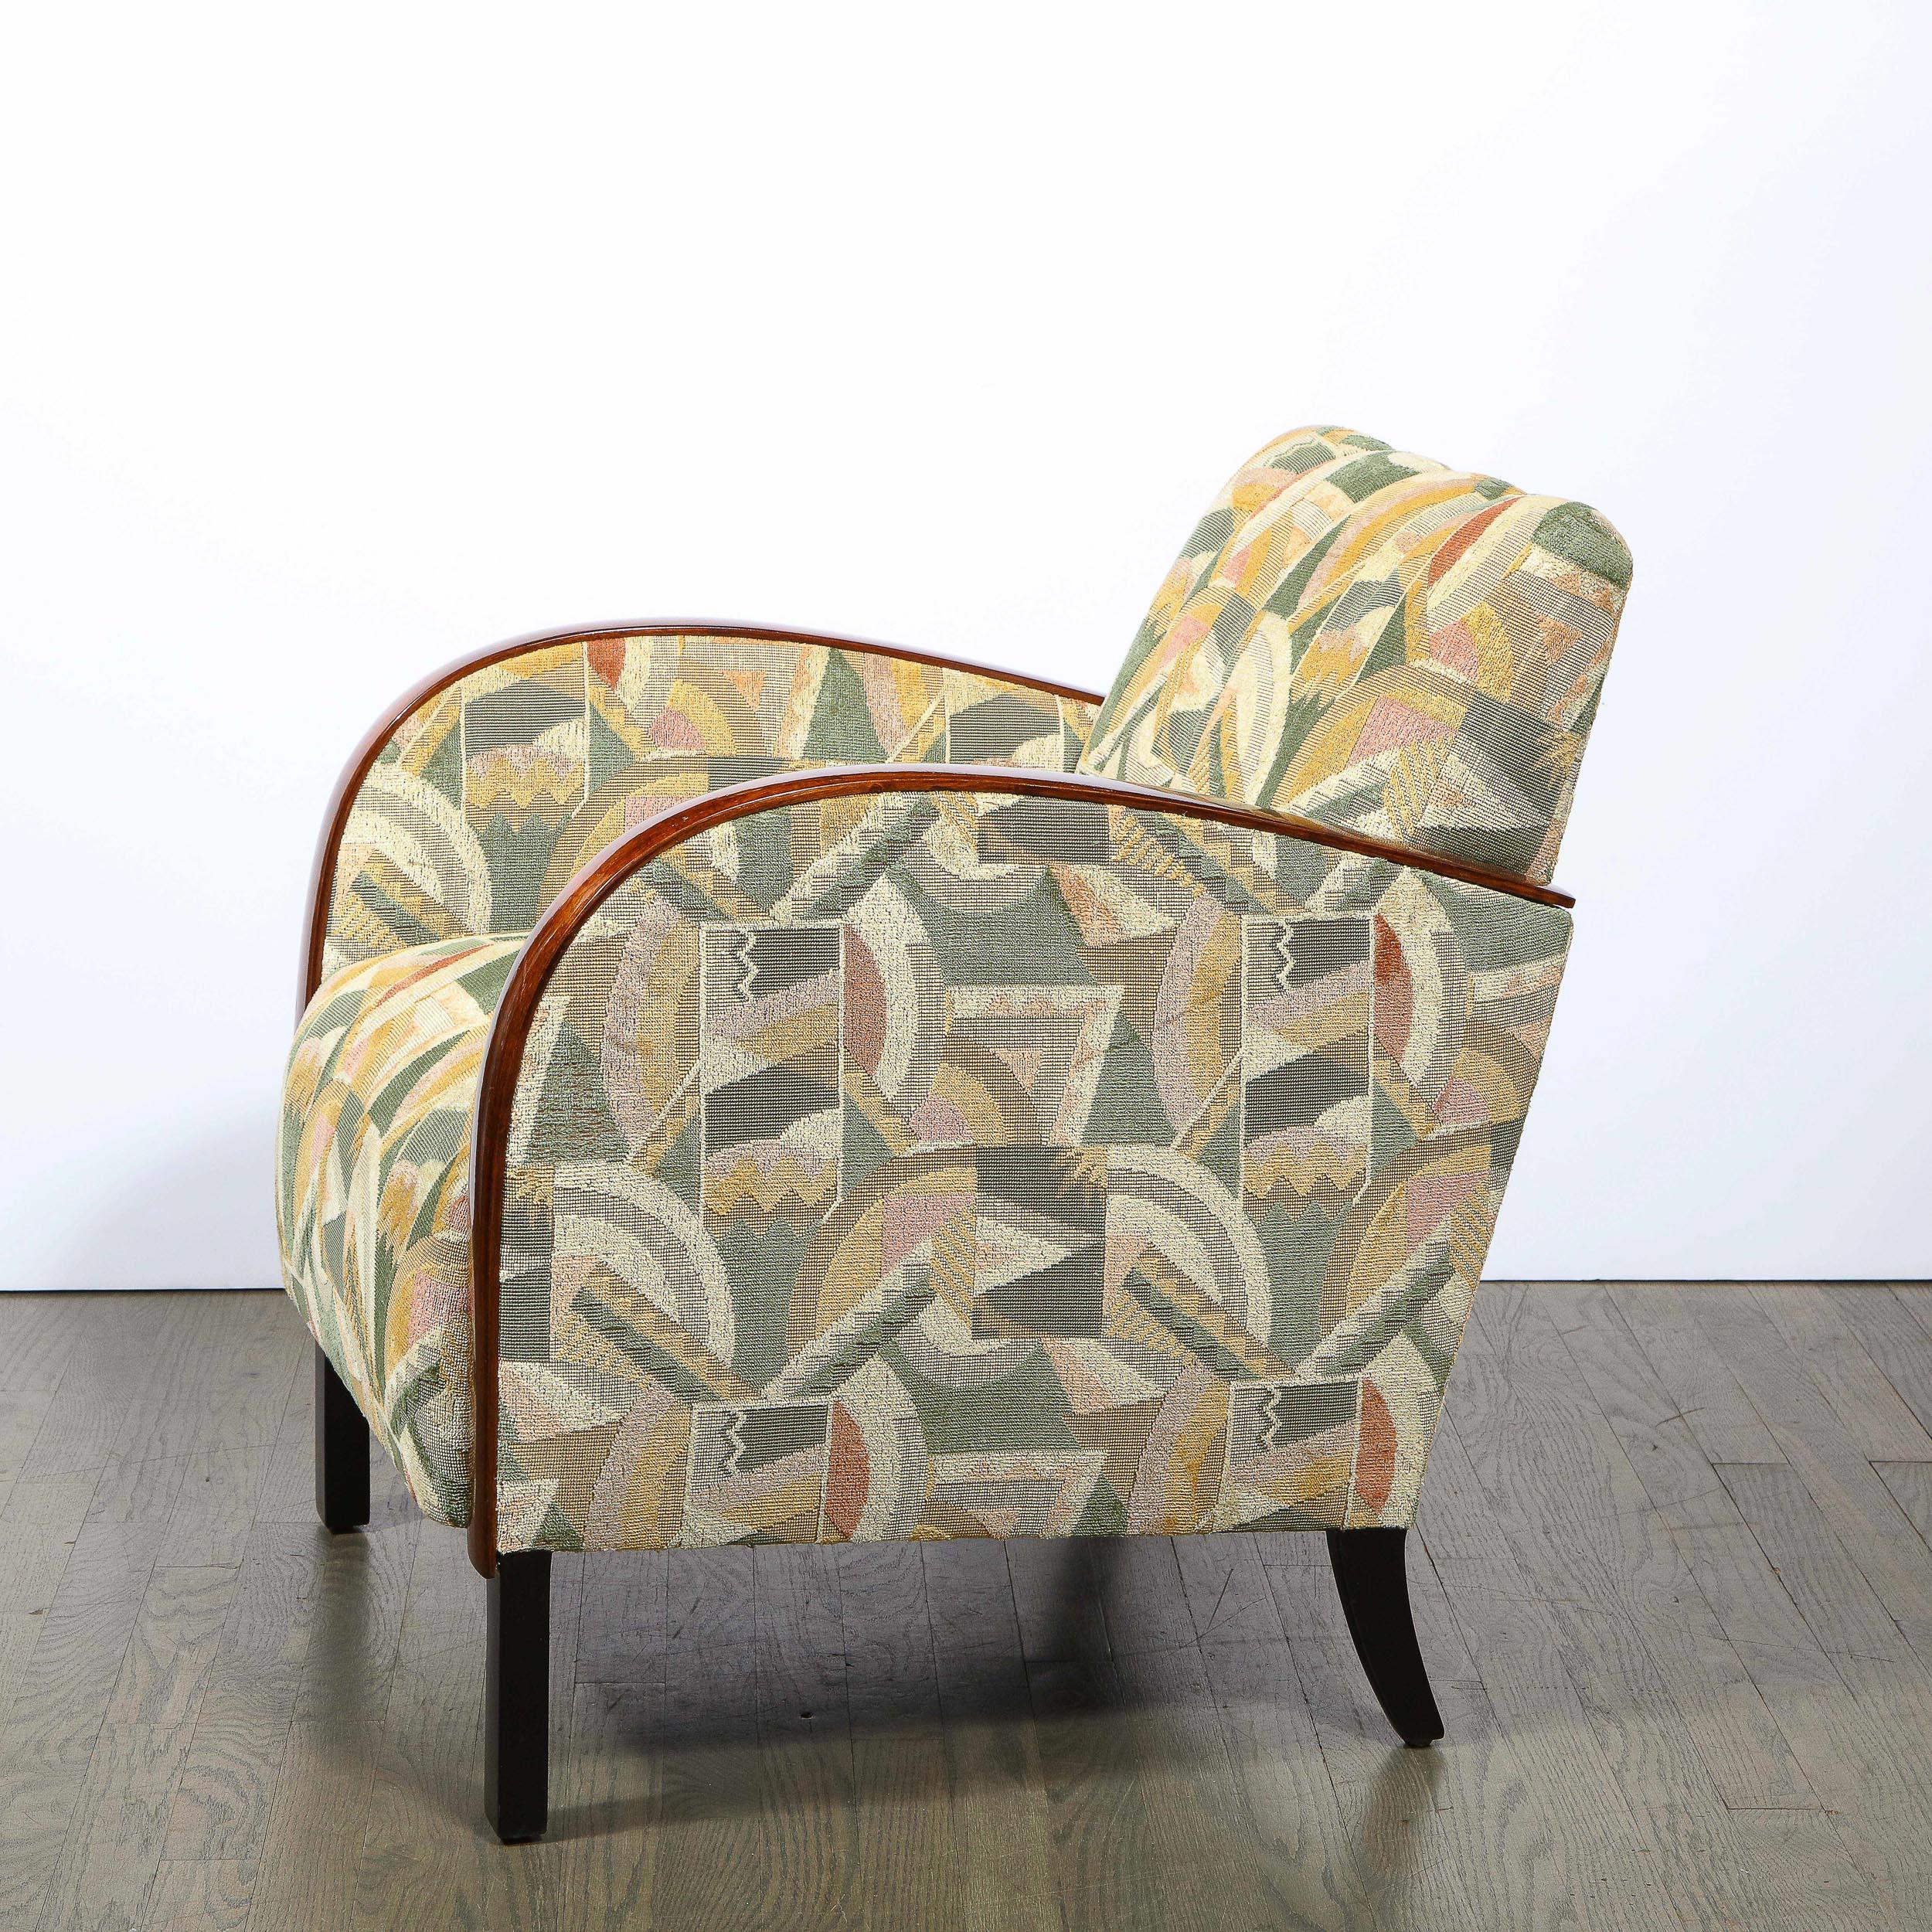 Upholstery Pair of Art Deco Streamlined Walnut Club Chairs in Cubist Clarence House Fabric